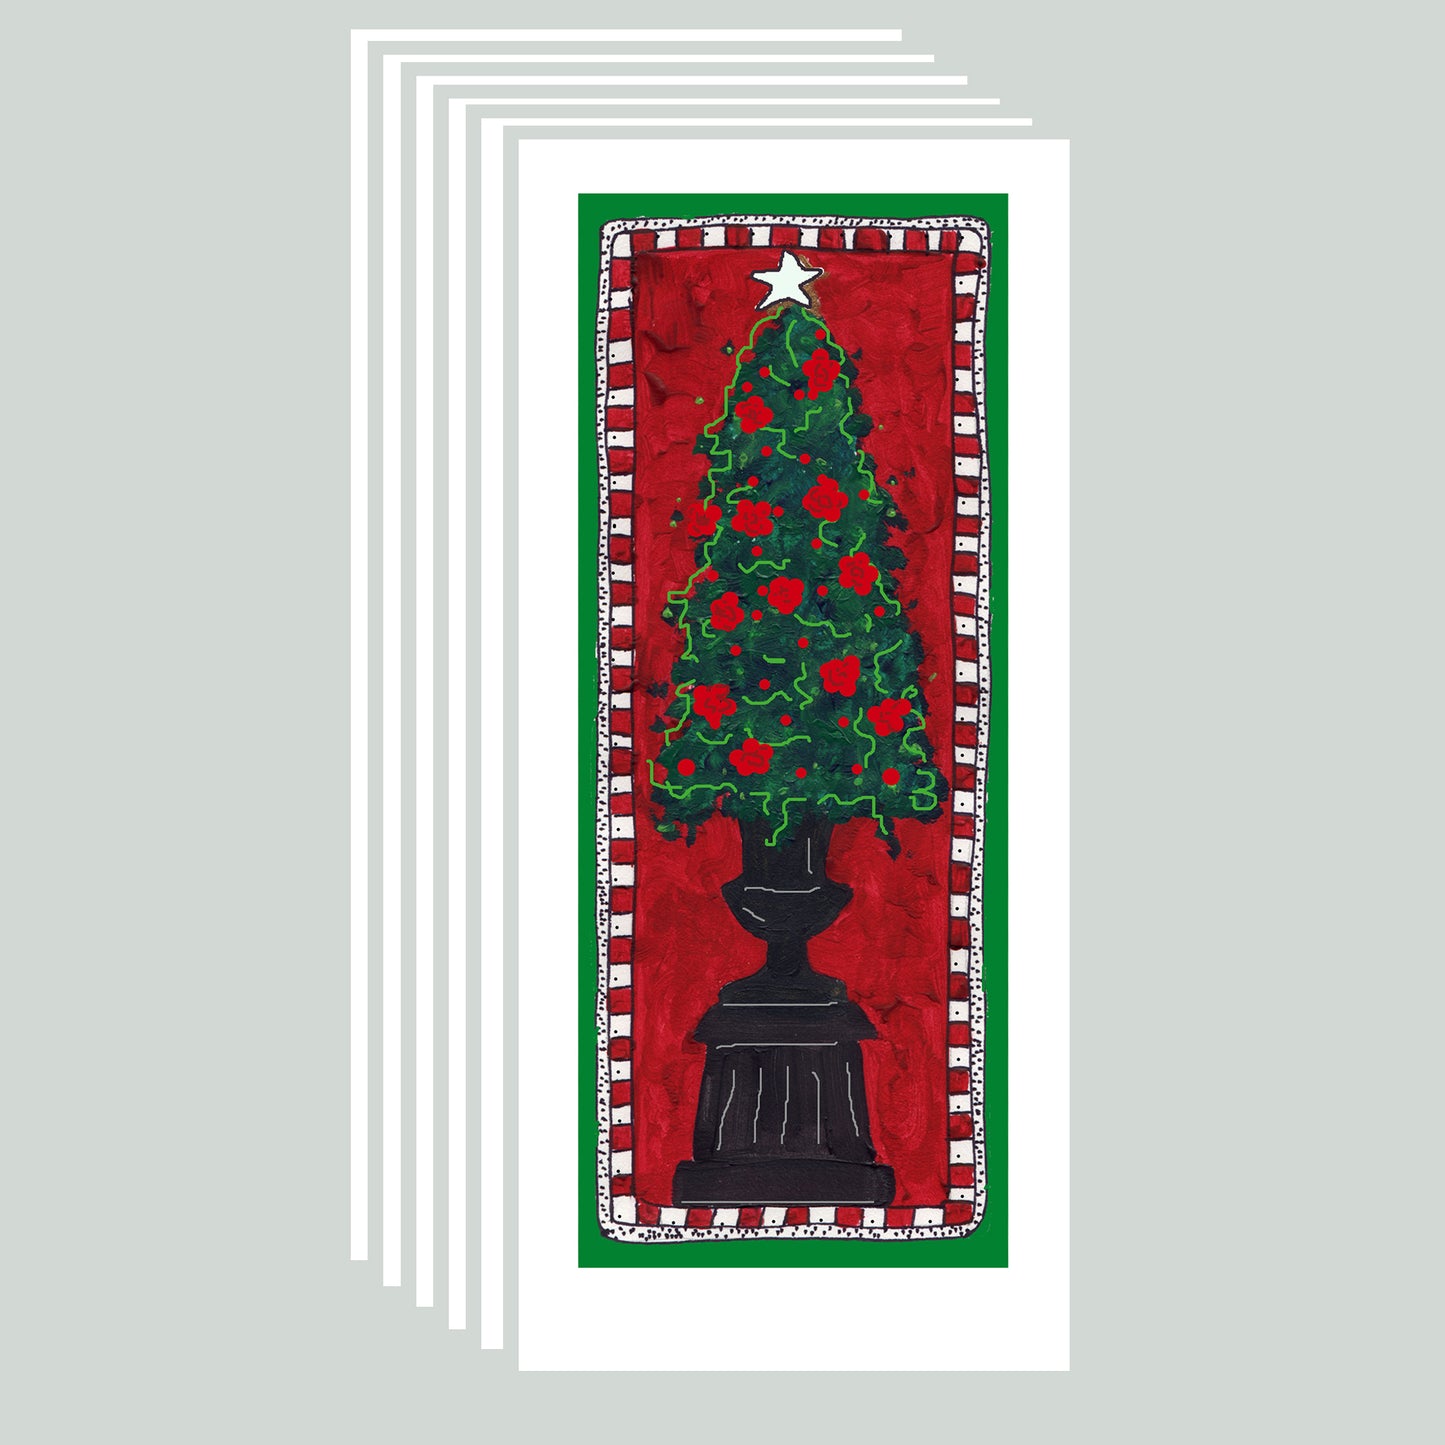 A Very Merry Christmas - A Christmas Tree Note Cards (Six Cards)